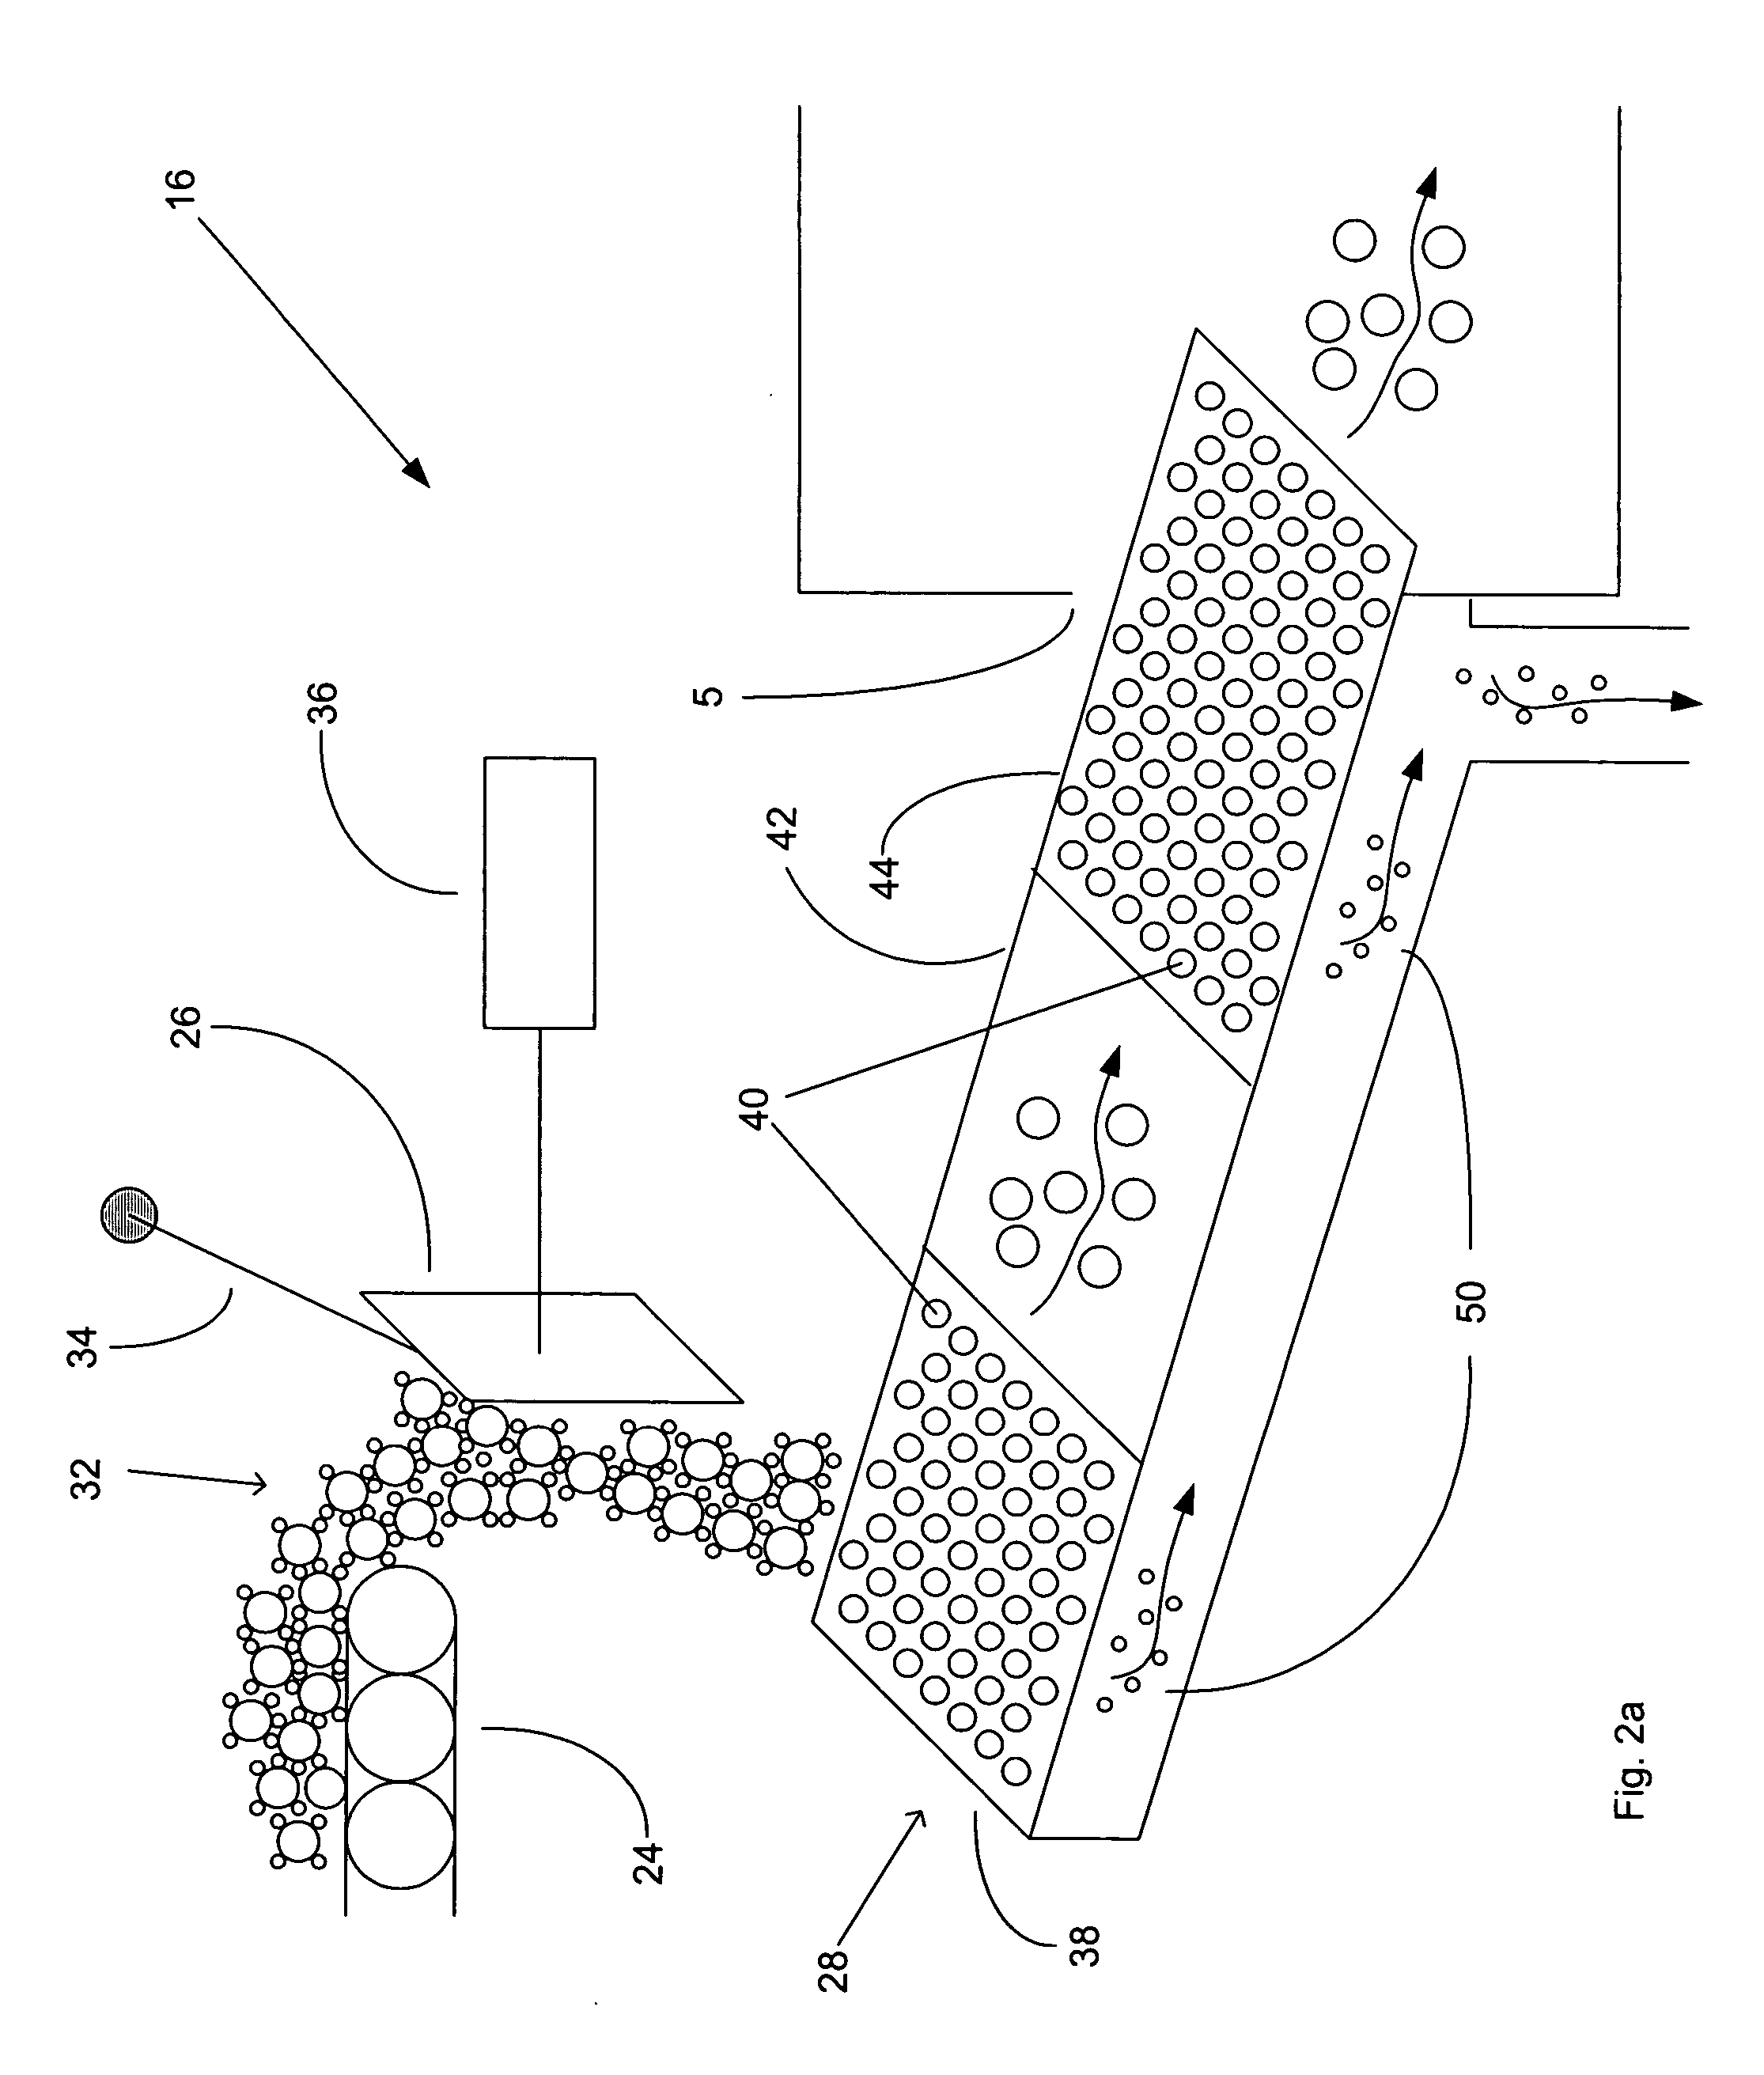 Apparatus and process for control of rotary breakers